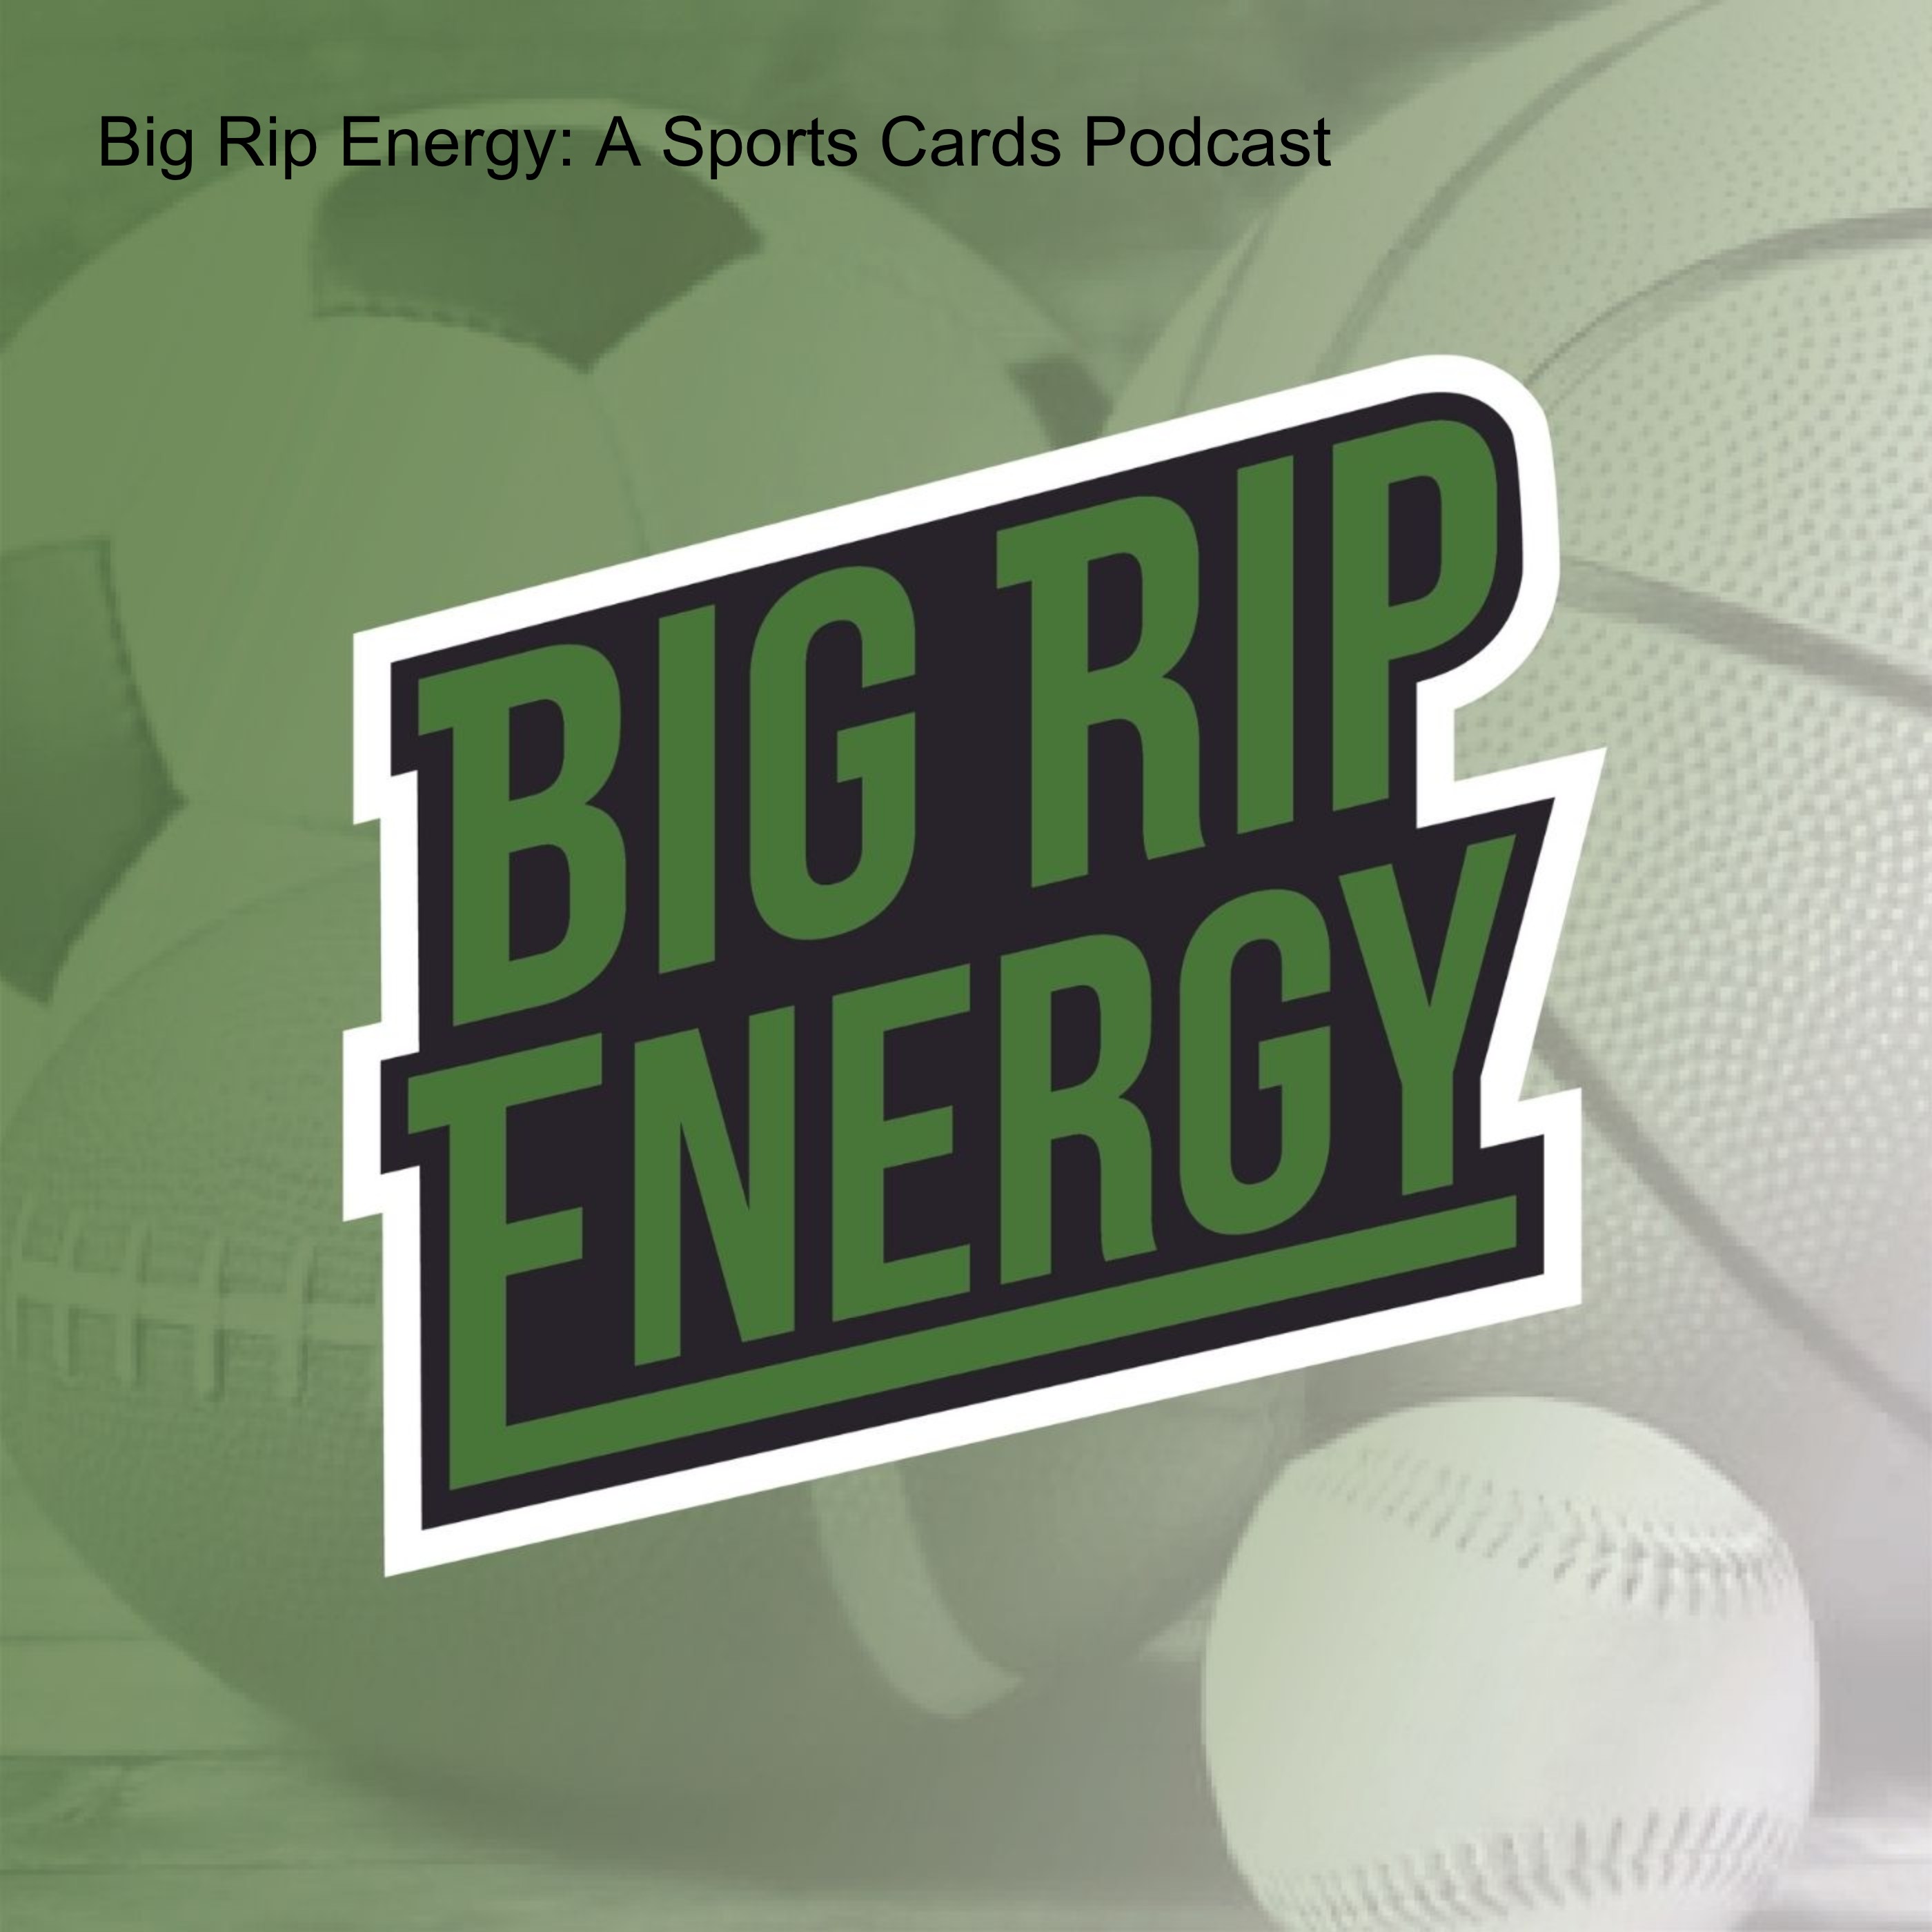 Big Rip Energy: A Sports Cards Podcast